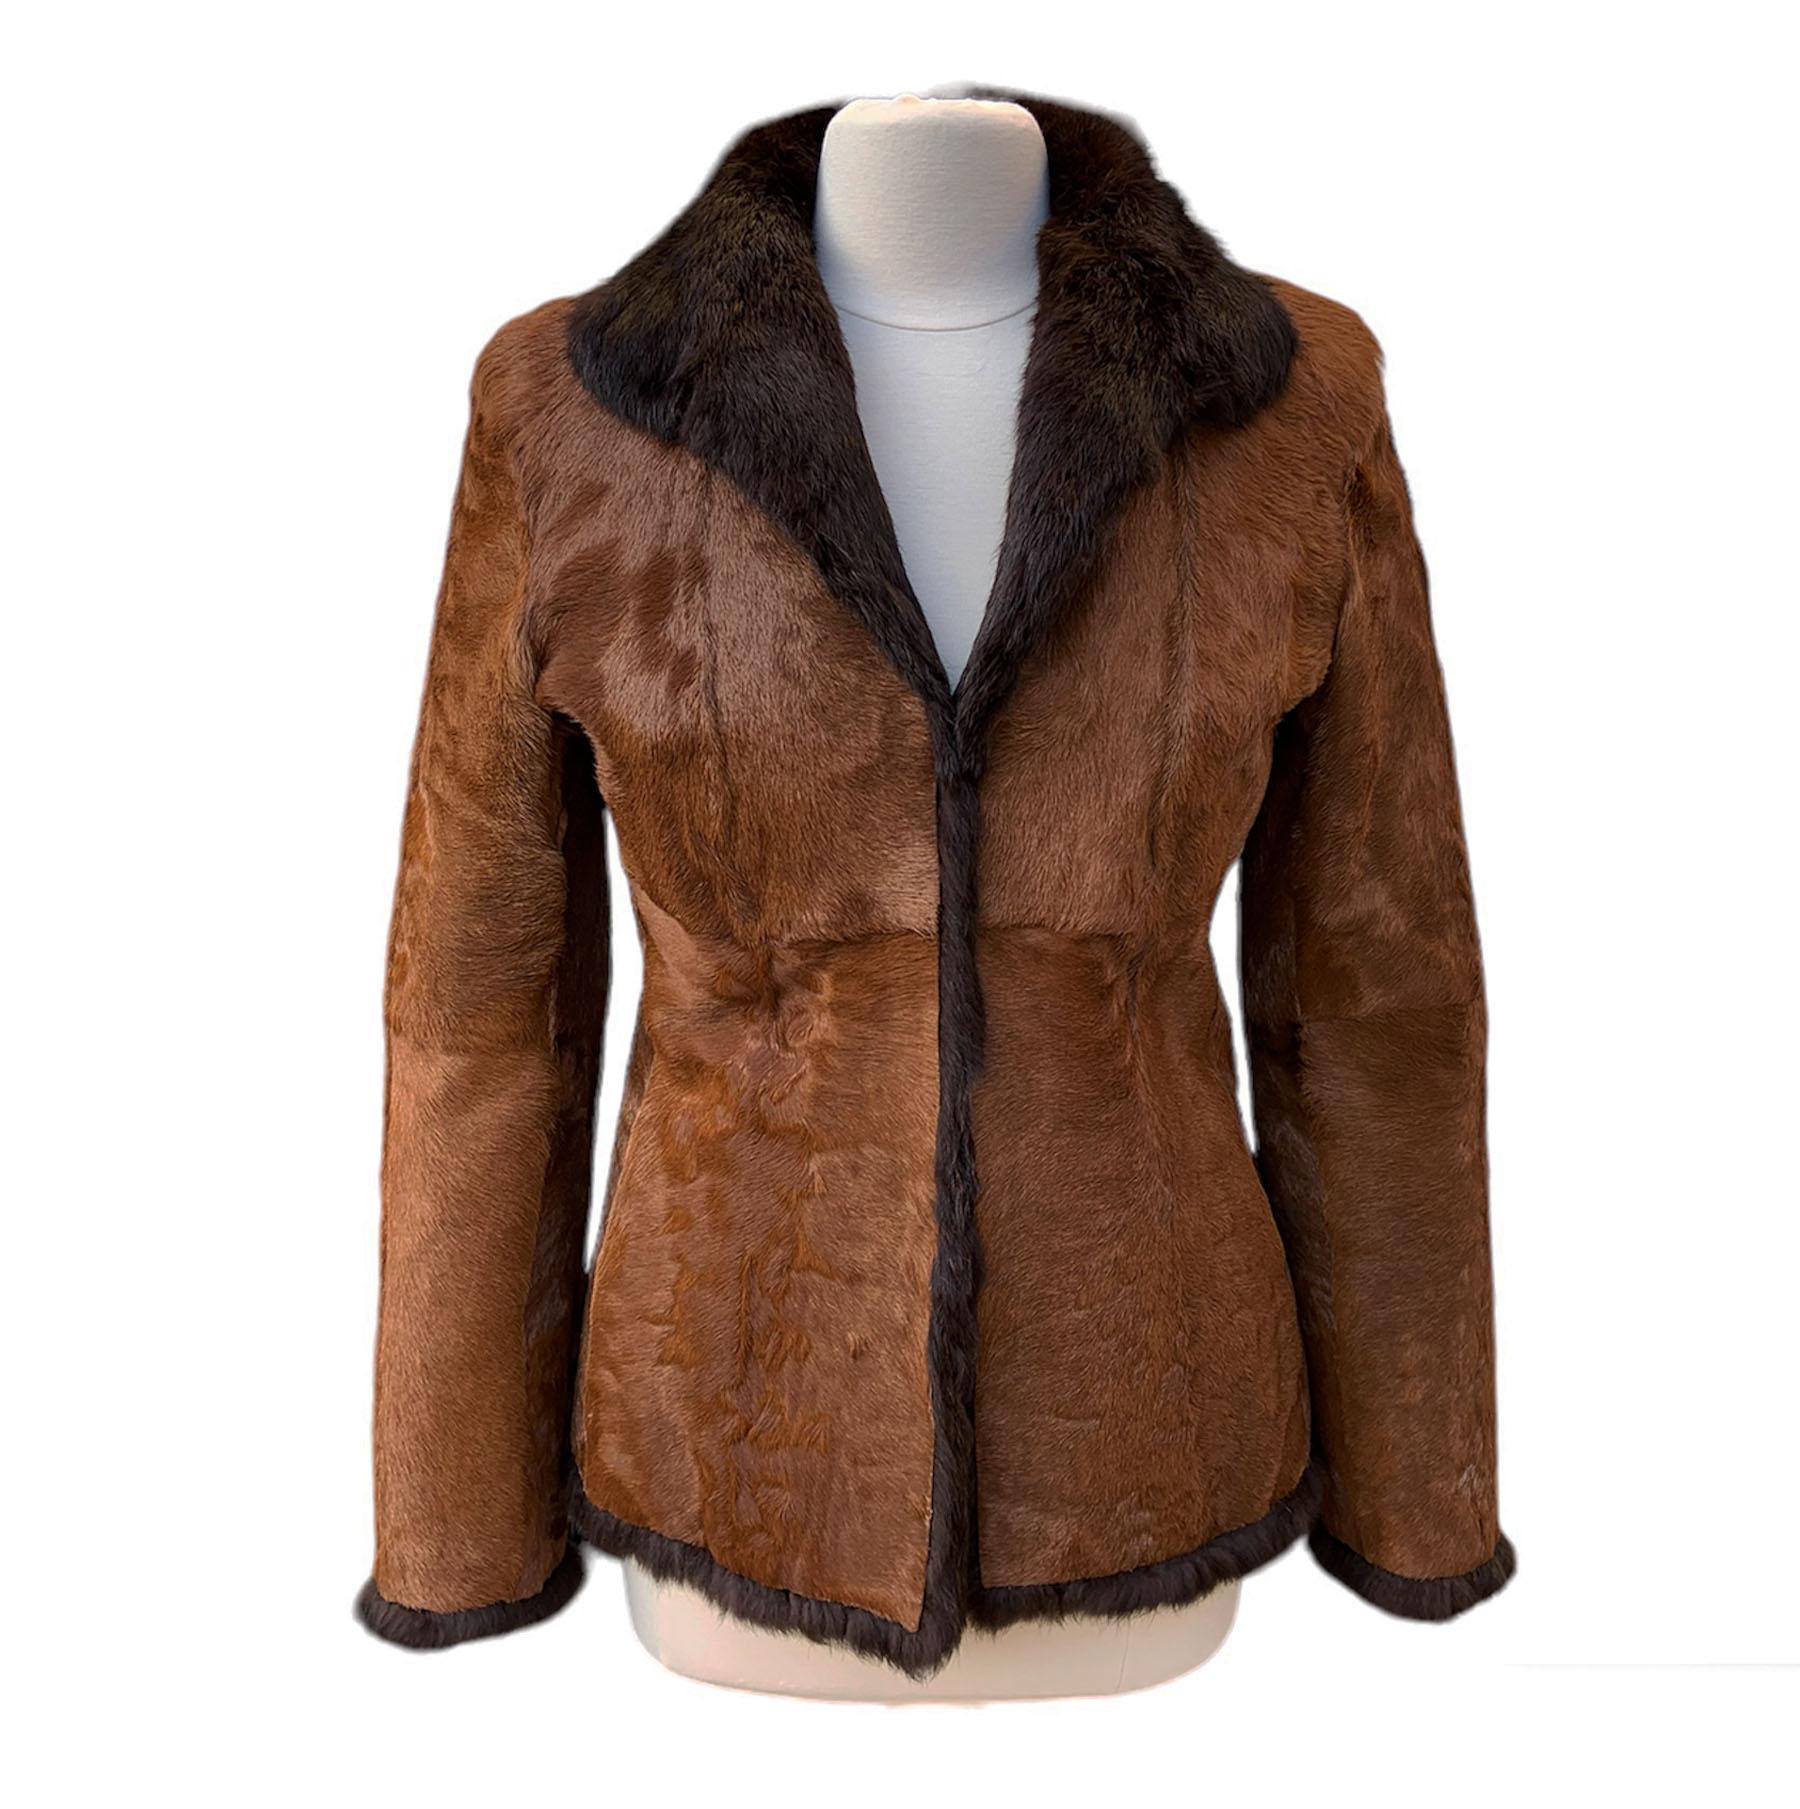 New Tom Ford for Gucci 1999 Collection 2 in 1 Reversible Brown Fur Jacket It. 42 In New Condition For Sale In Montgomery, TX